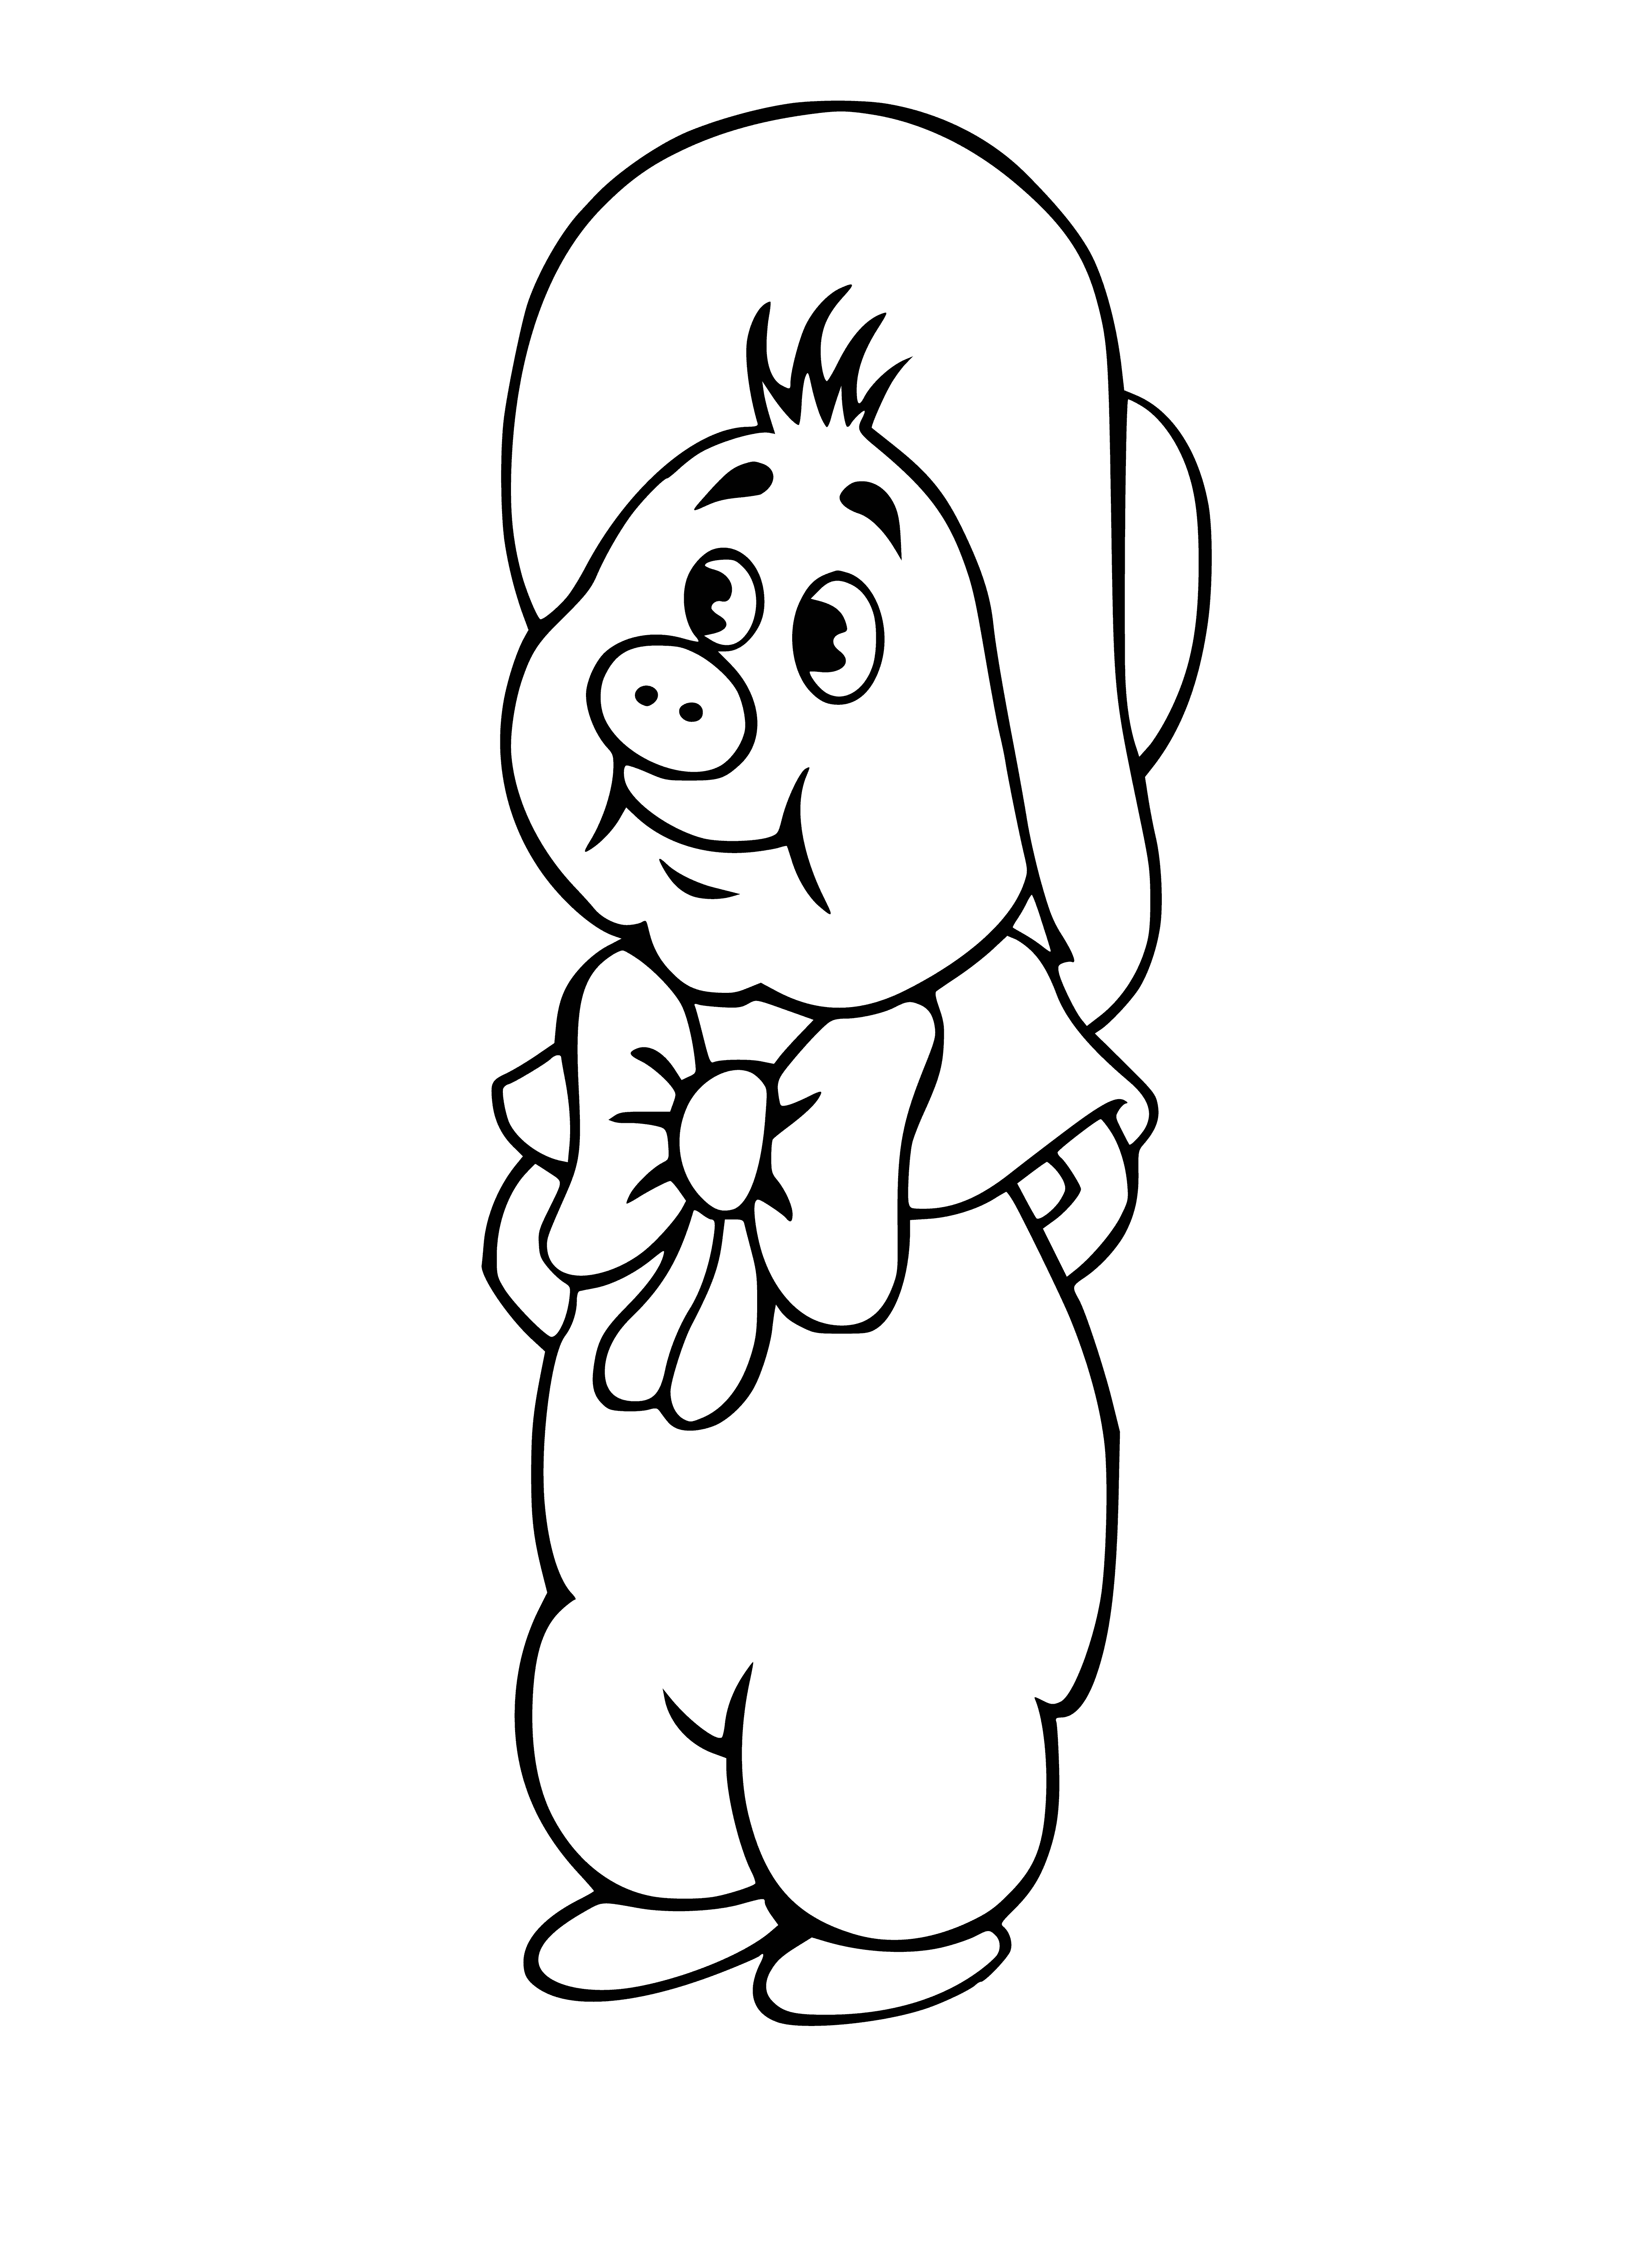 coloring page: Funtik, a pig on an adventure, rides his bicycle, helmet and all, with a big smile in a beautiful landscape.